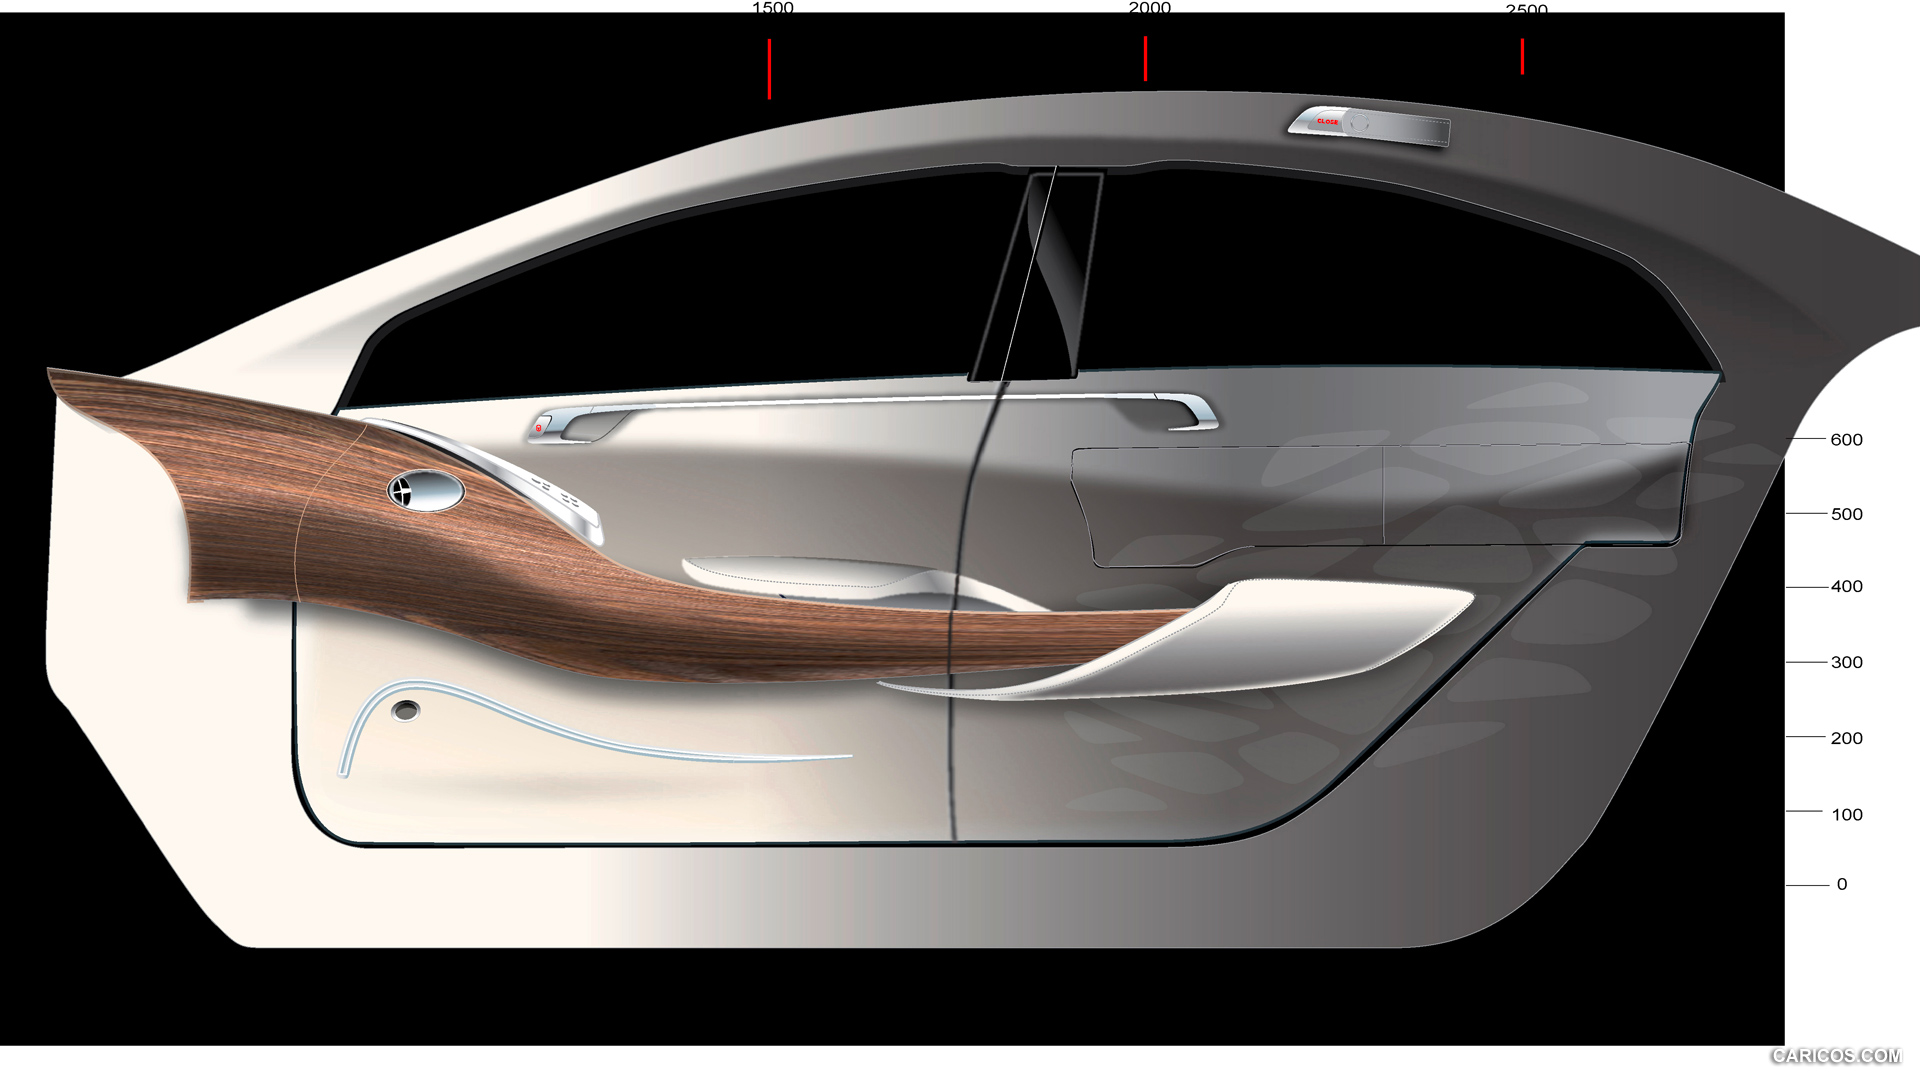 Mercedes-Benz F800 Style Concept (2010)  - Design Sketch, #117 of 120